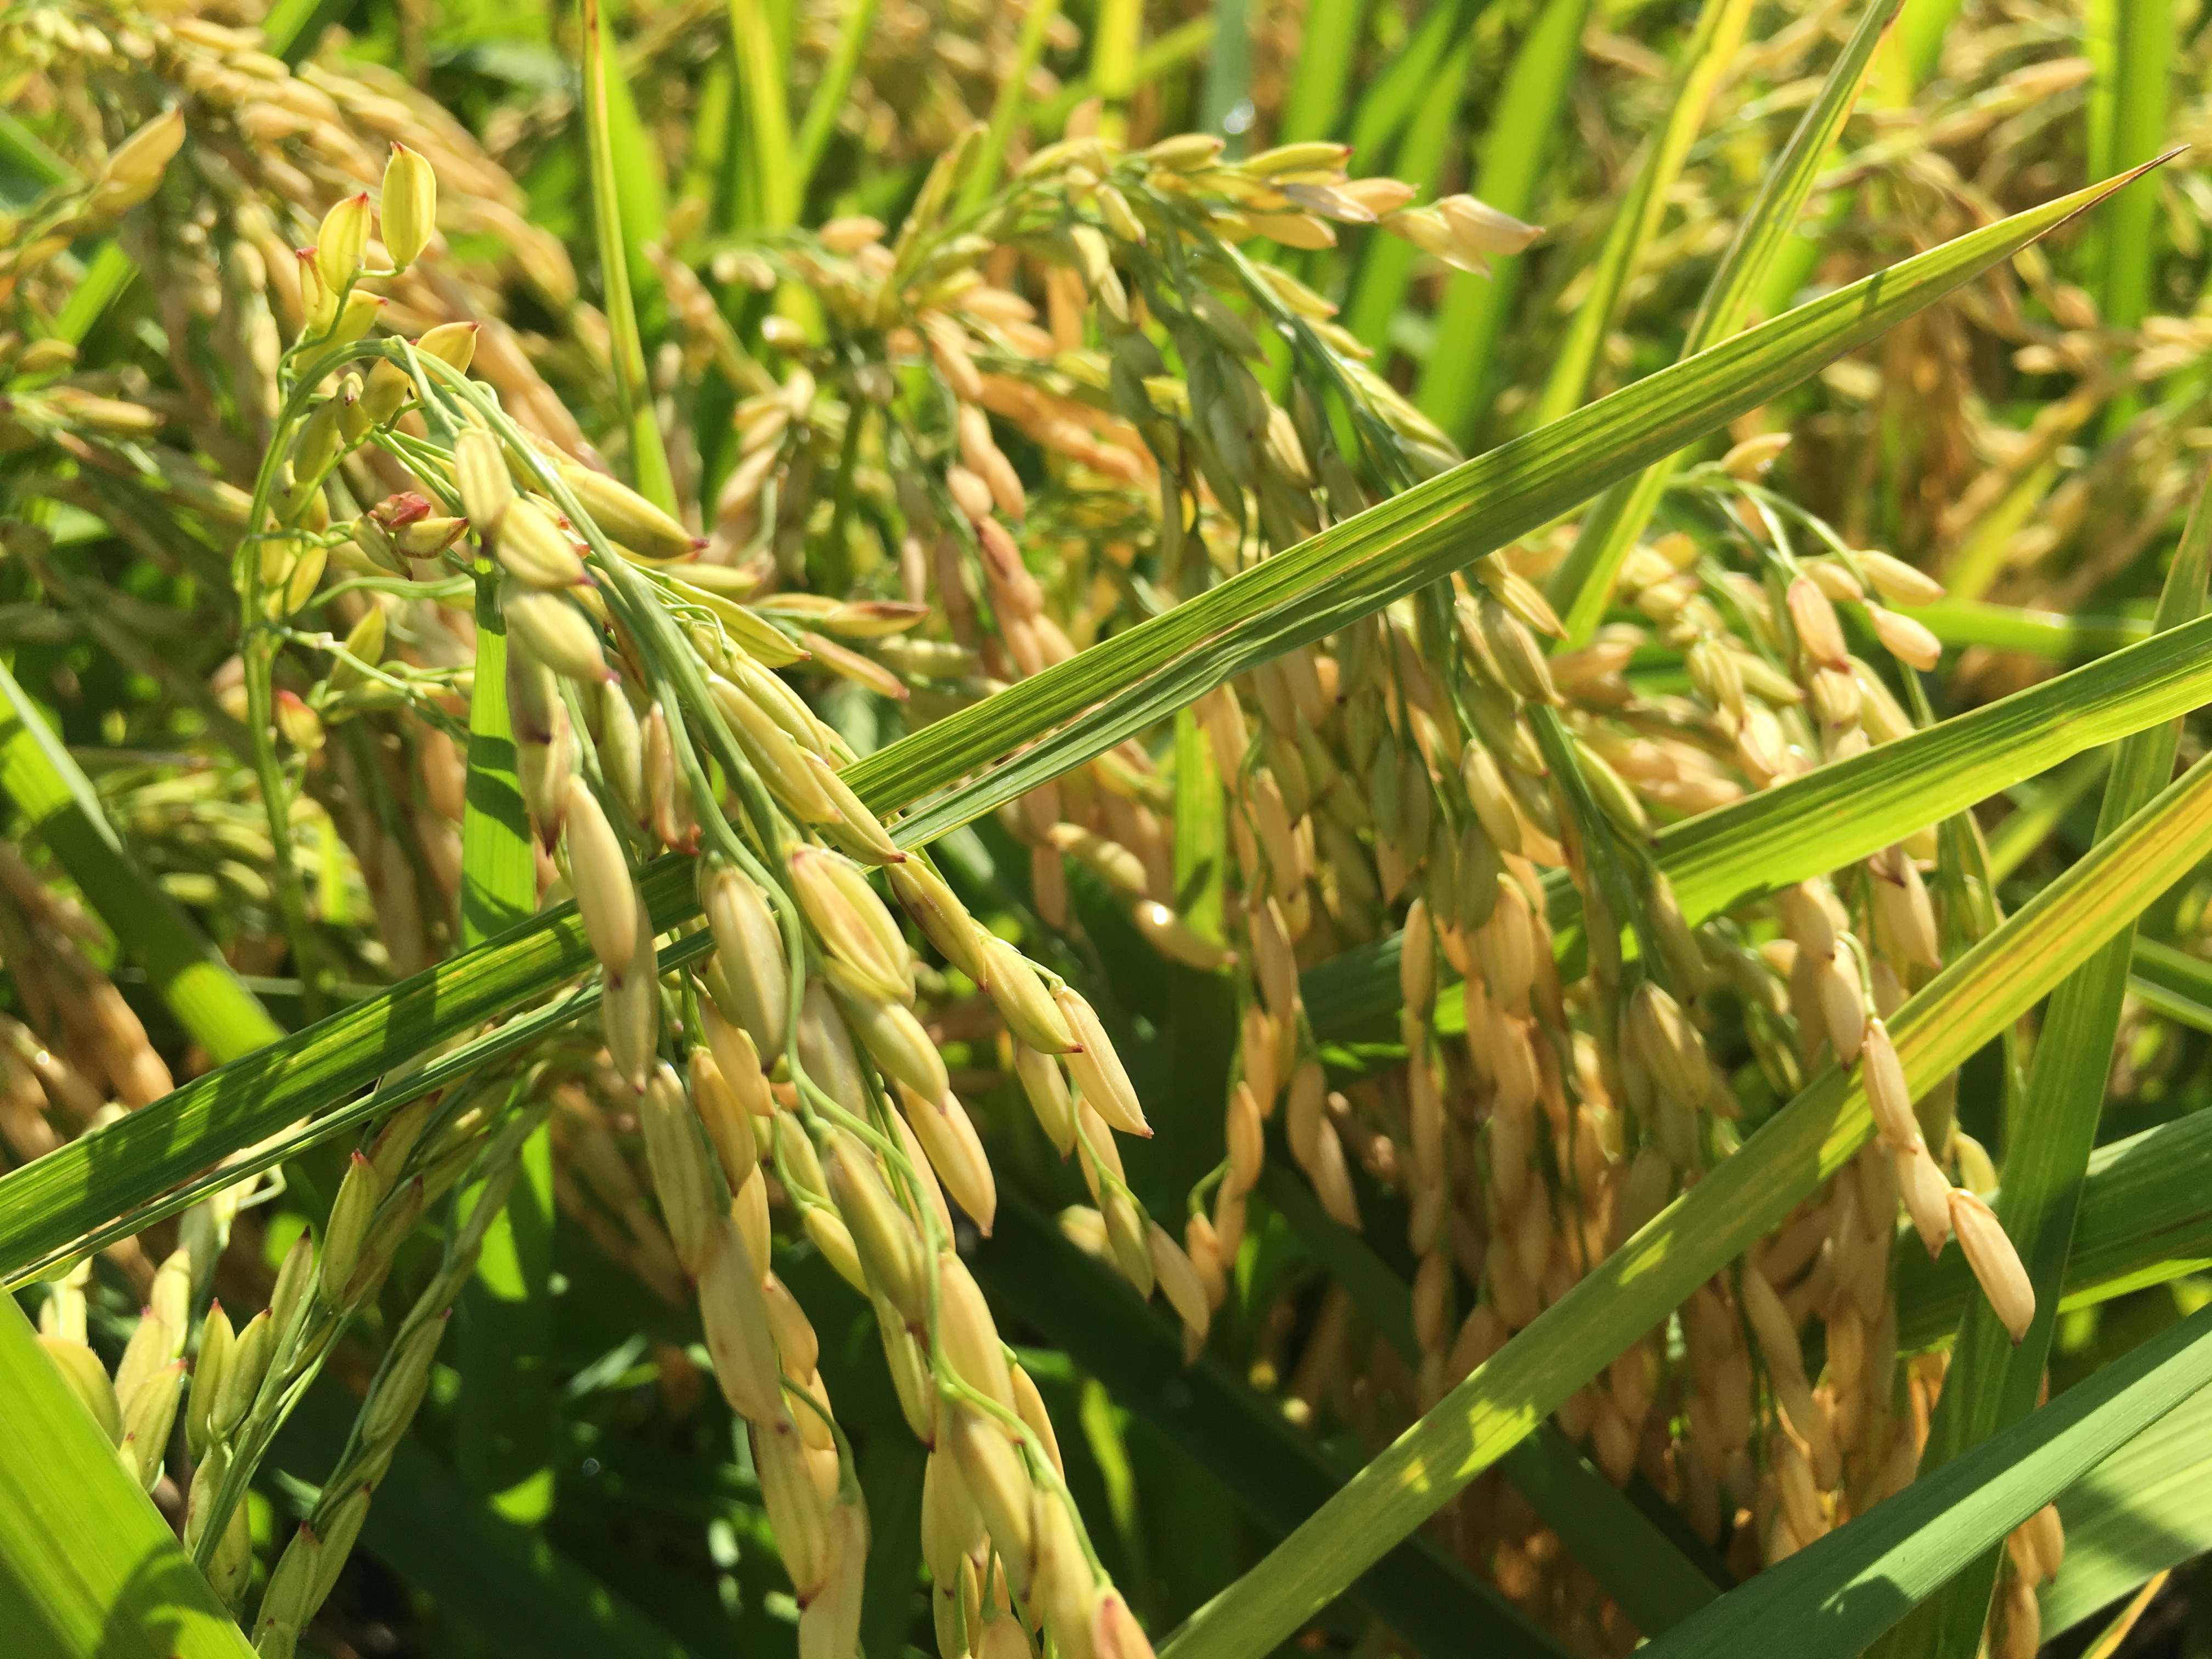 From Riceland Farms: Grain Ripening and Maturation | Riceland Foods